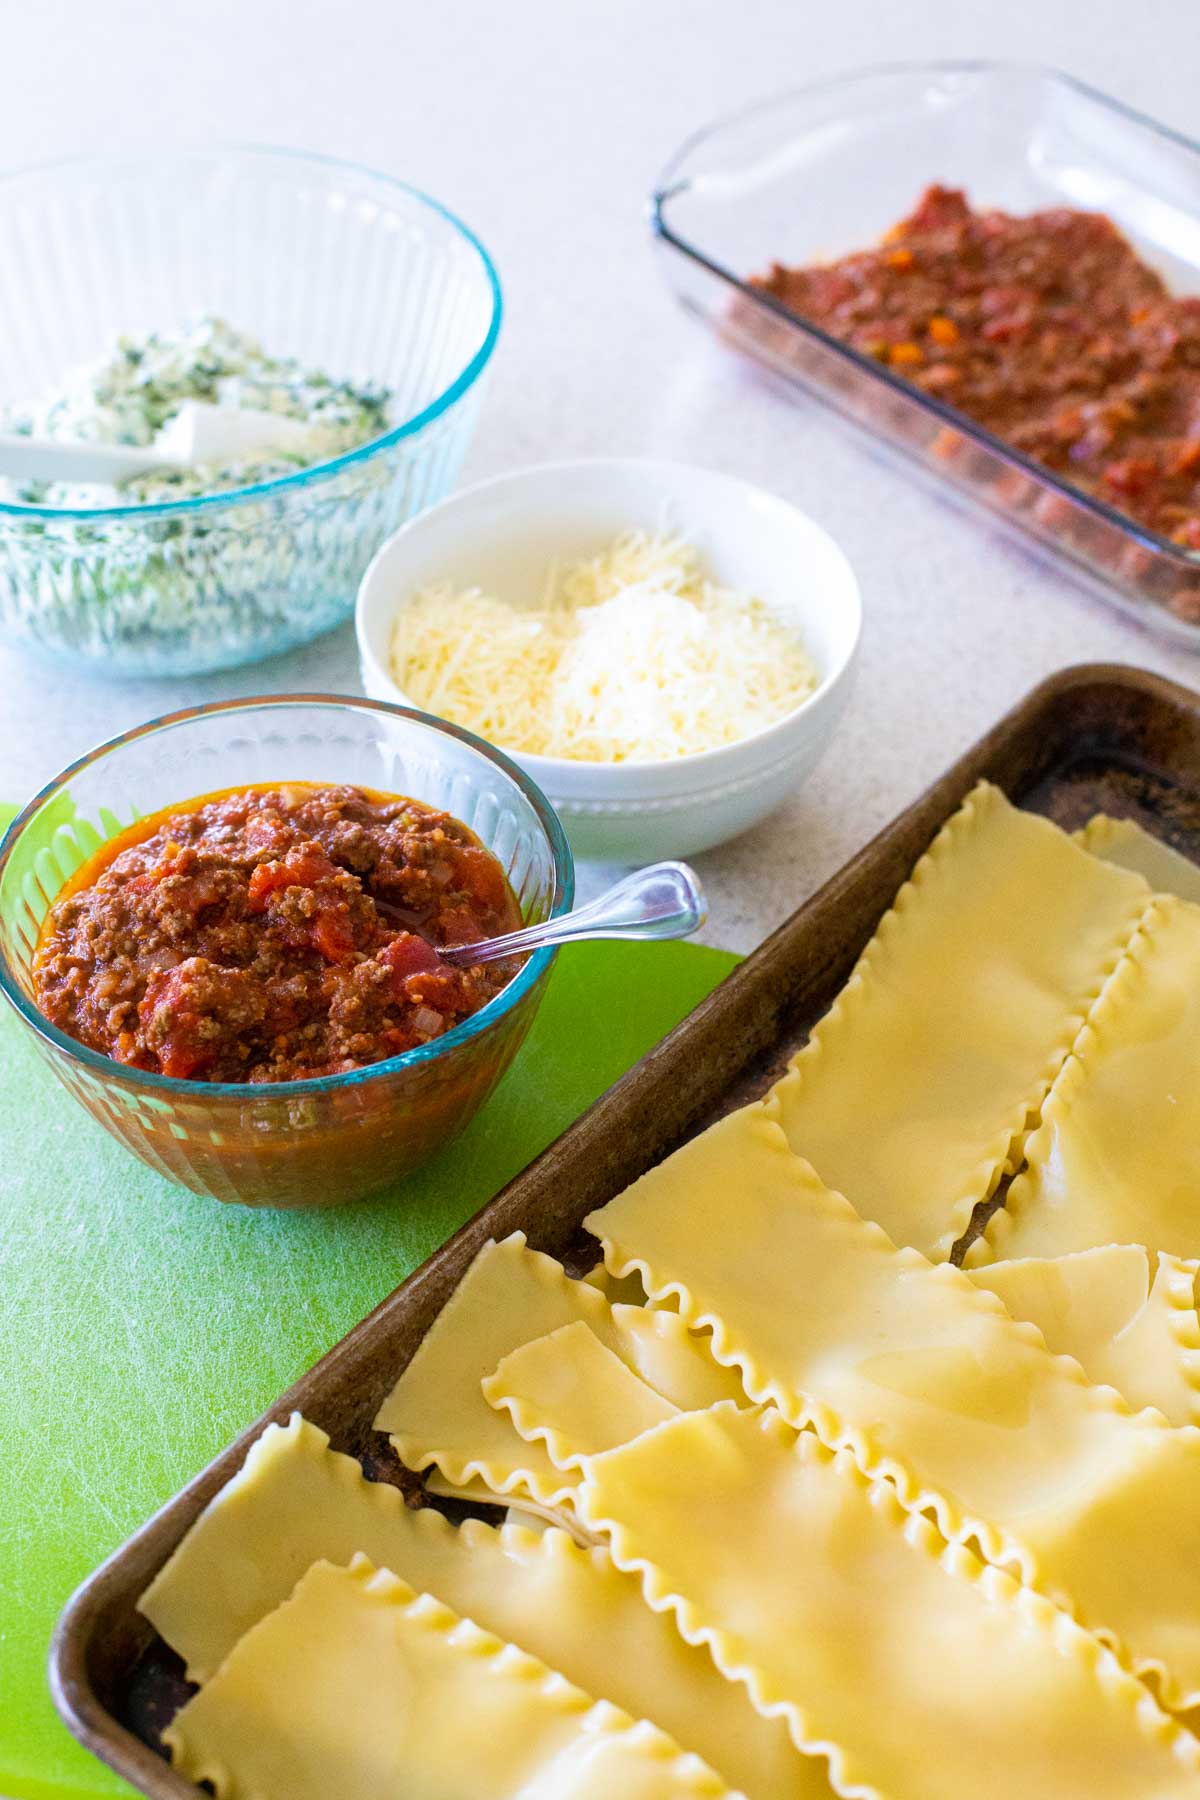 The ingredients to make the lasagna roll-ups are assembled on the counter.